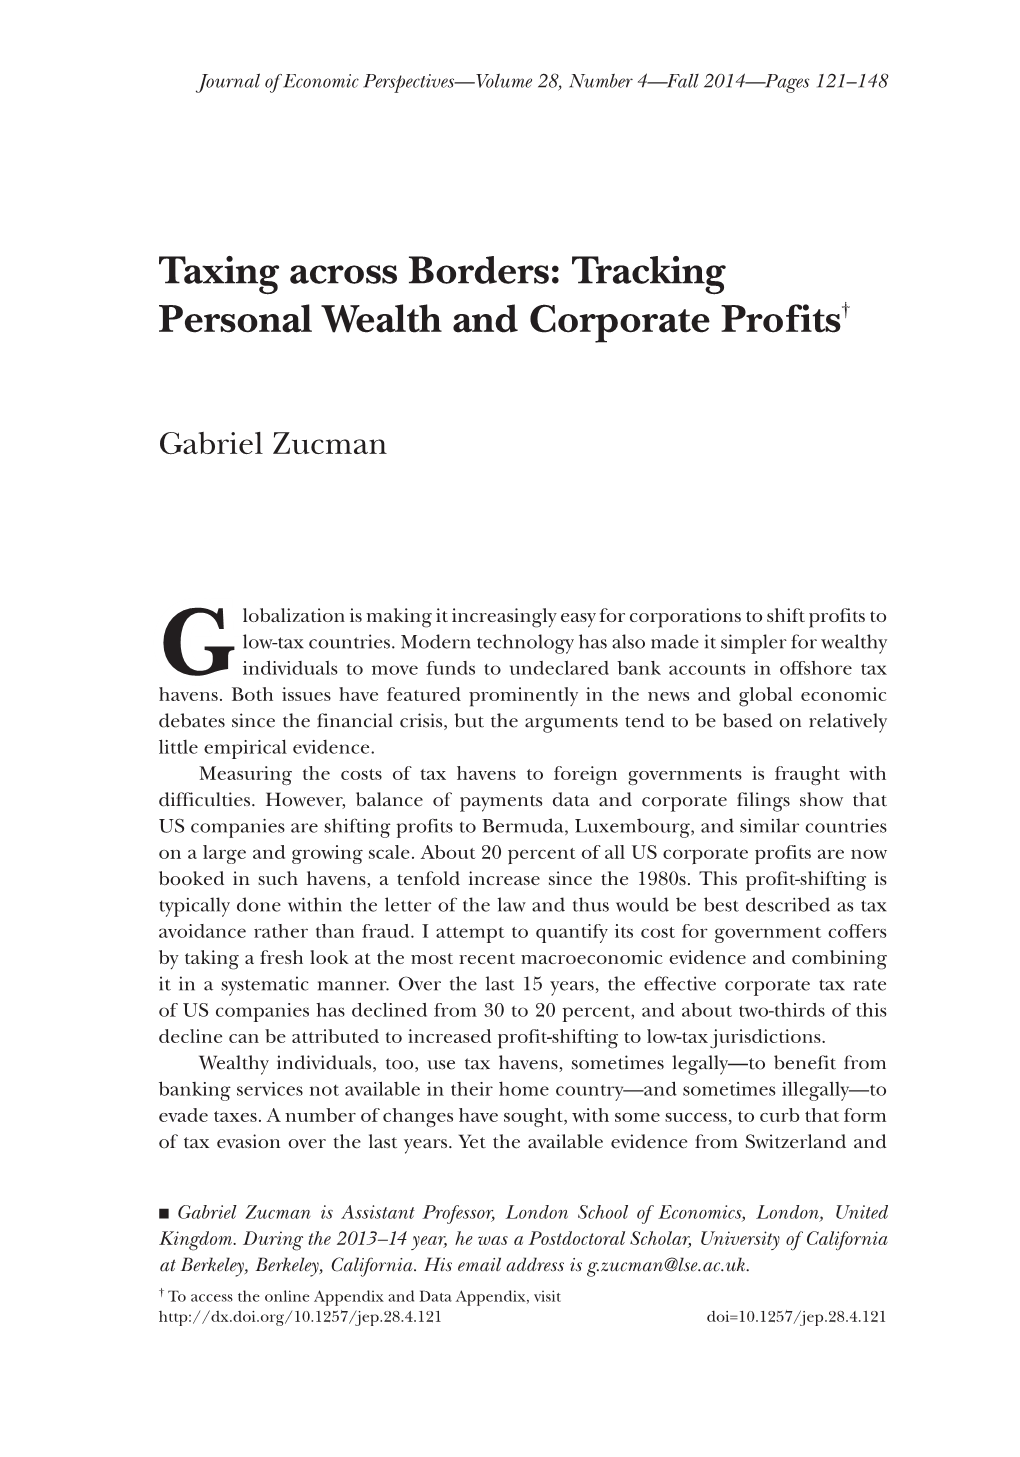 Taxing Across Borders: Tracking Personal Wealth and Corporate Profits†